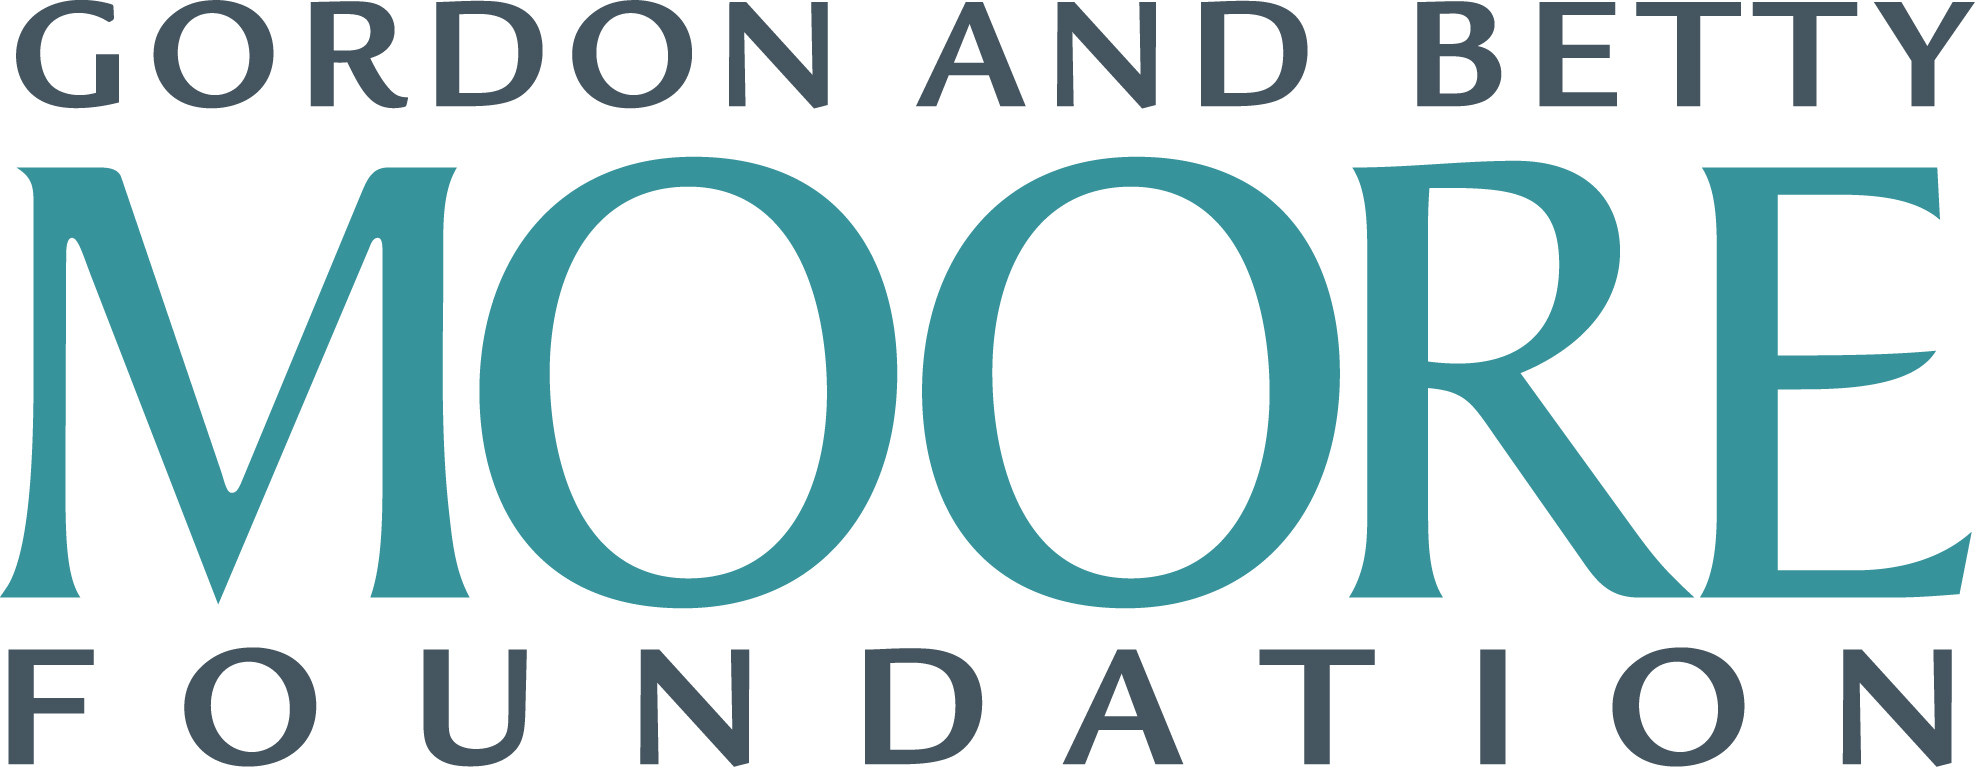 Gordon and Betty Moore Foundation_Logo.png